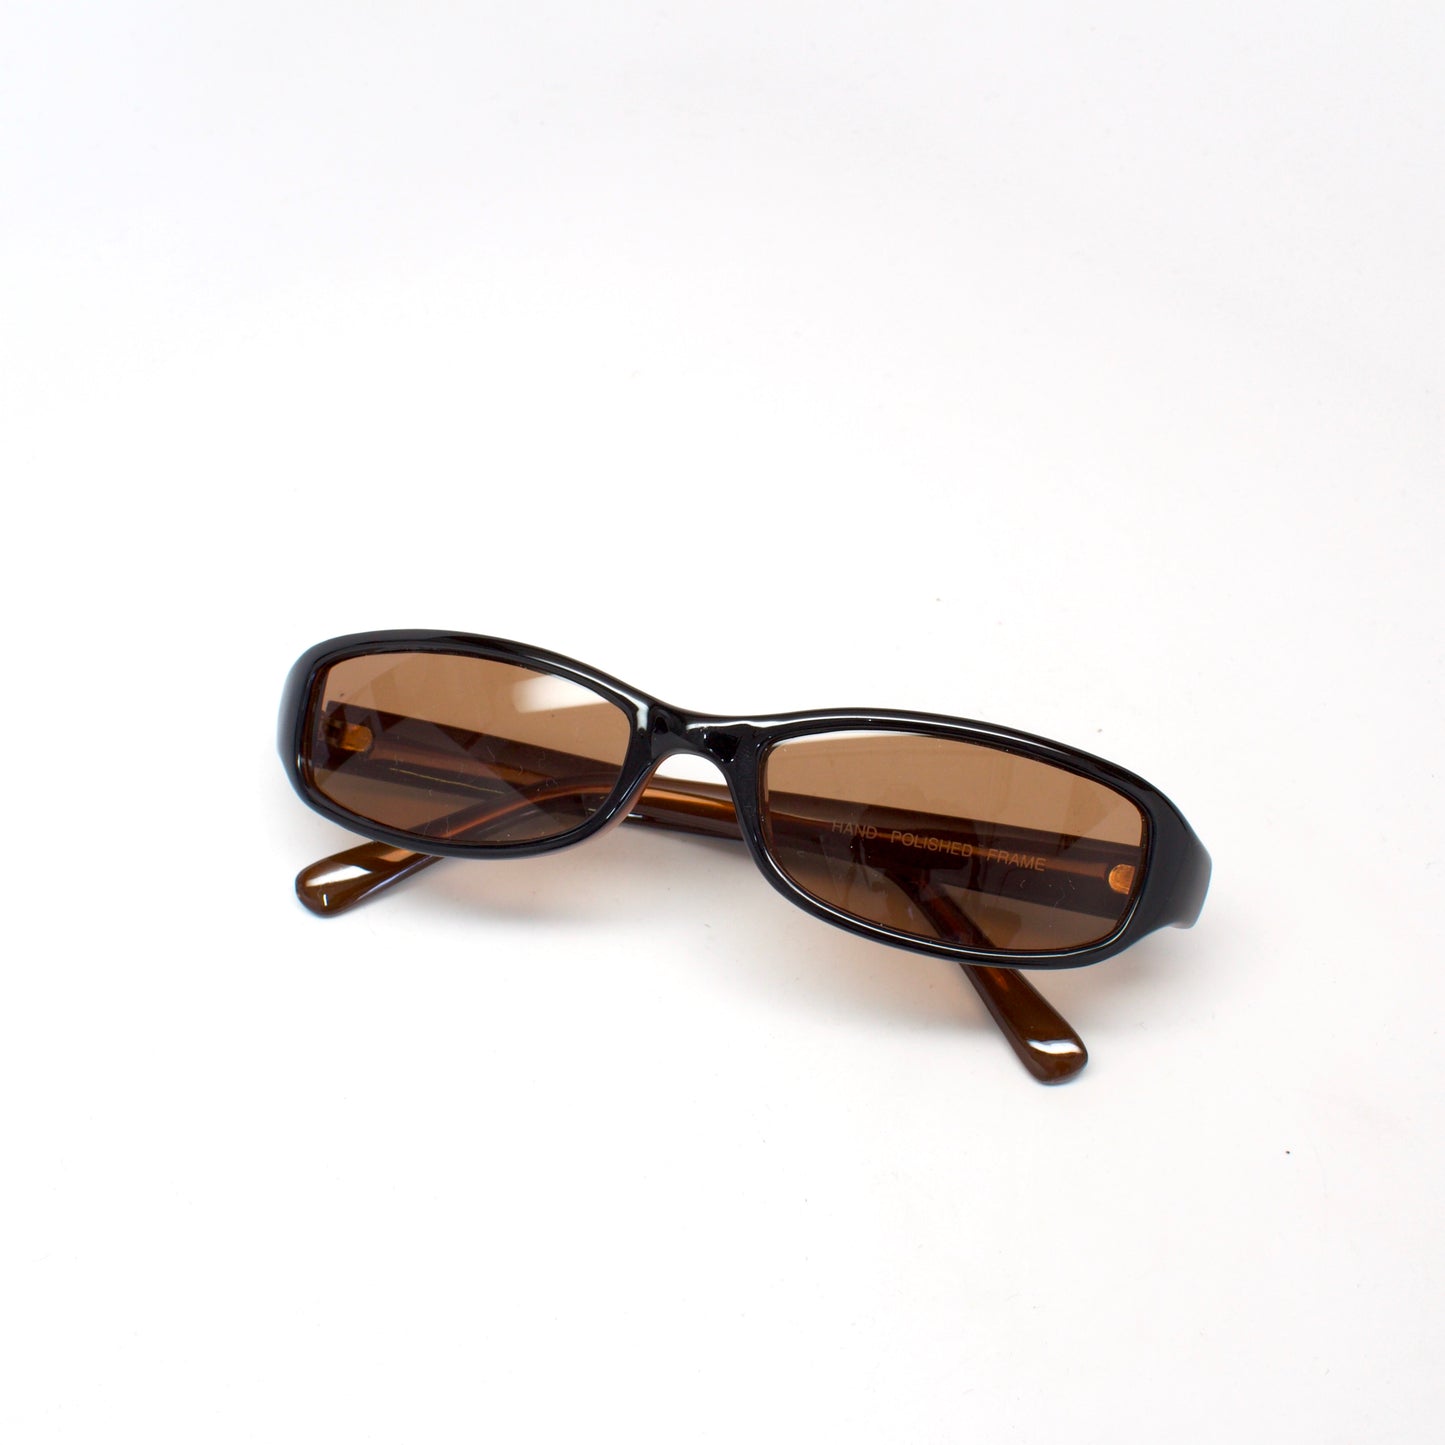 Vintage Small Size 90s Deadstock Sunglasses - Brown